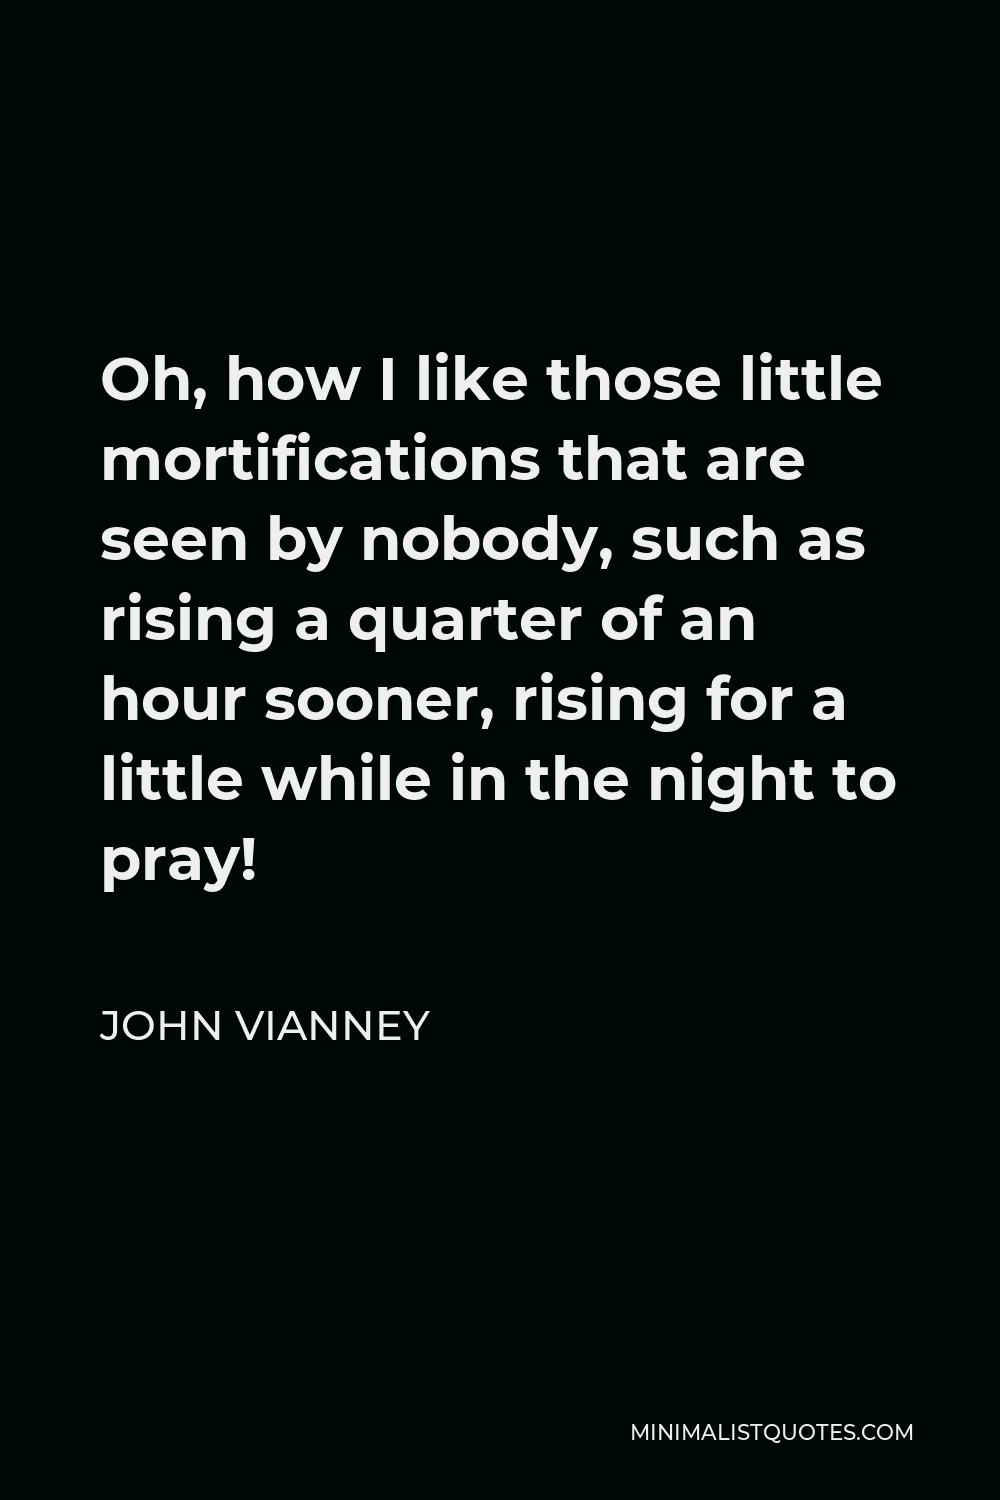 John Vianney Quote - Oh, how I like those little mortifications that are seen by nobody, such as rising a quarter of an hour sooner, rising for a little while in the night to pray!